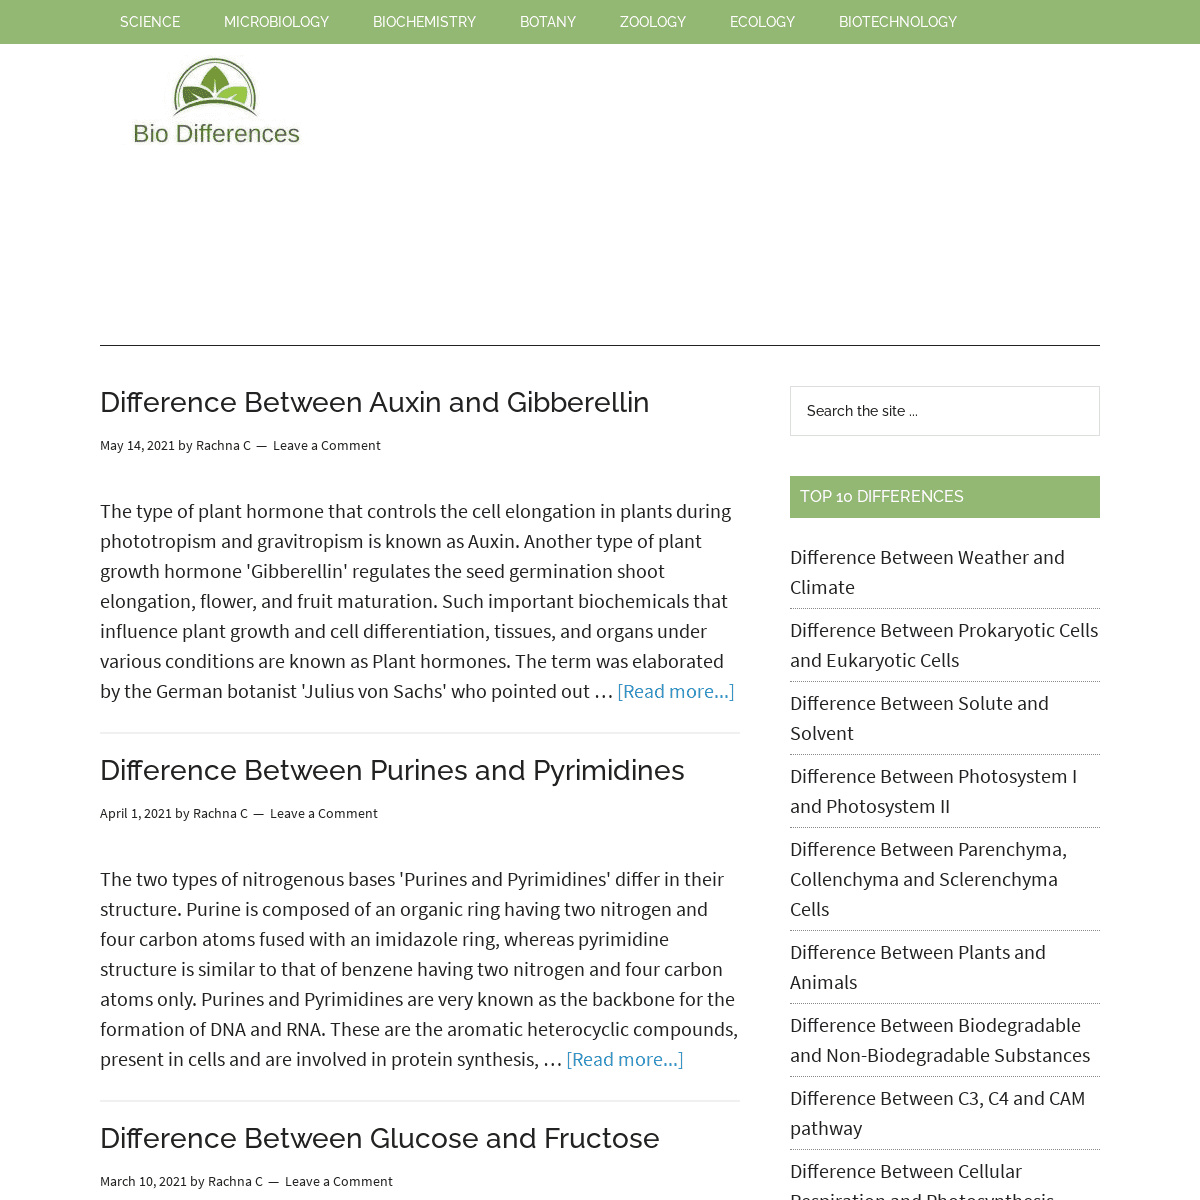 A complete backup of https://biodifferences.com